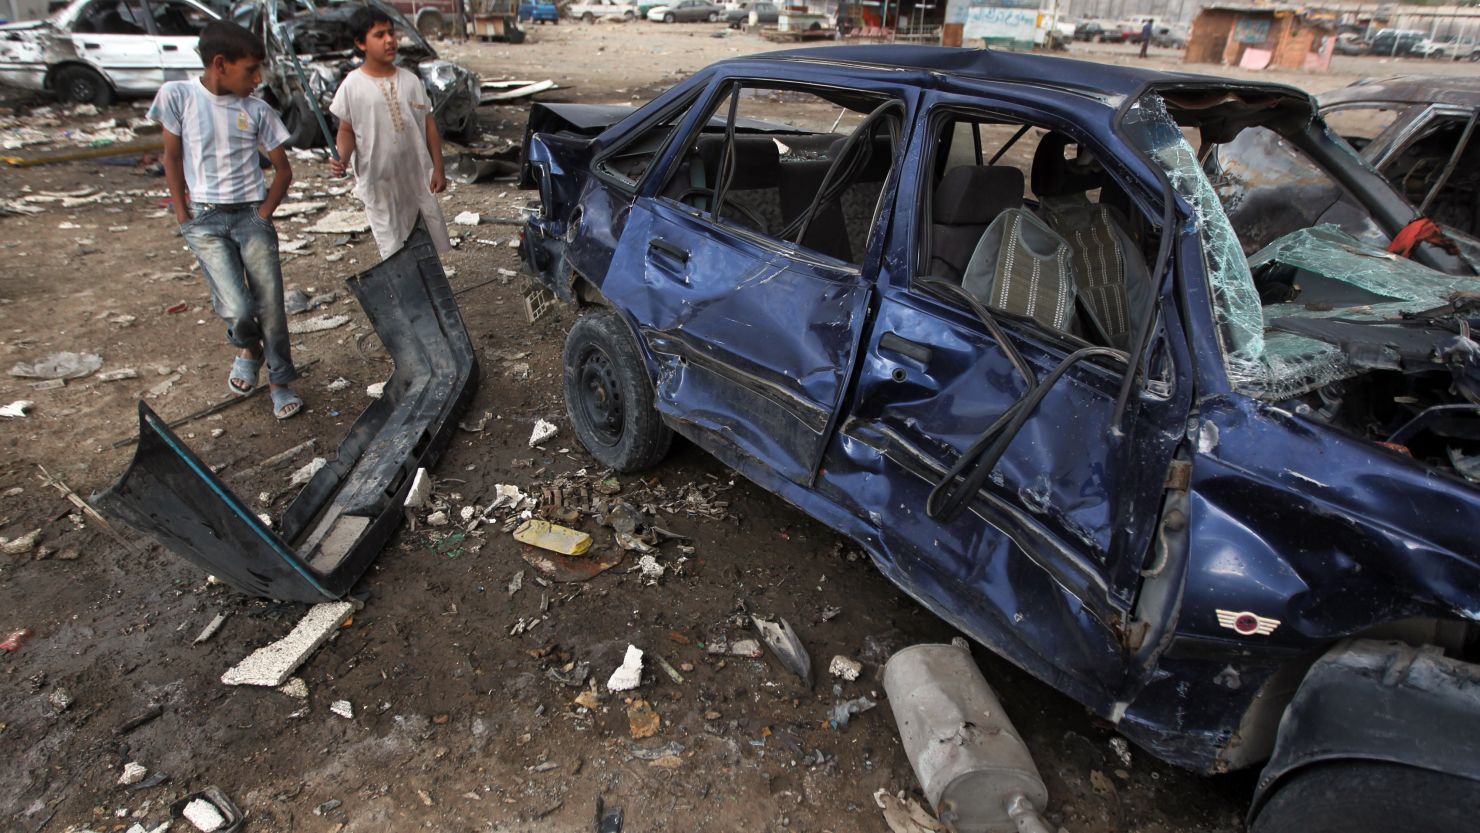 Iraqi boys inspect the site of a car bomb attack in Baghdad's district of Sadr City on April 16, 2013.